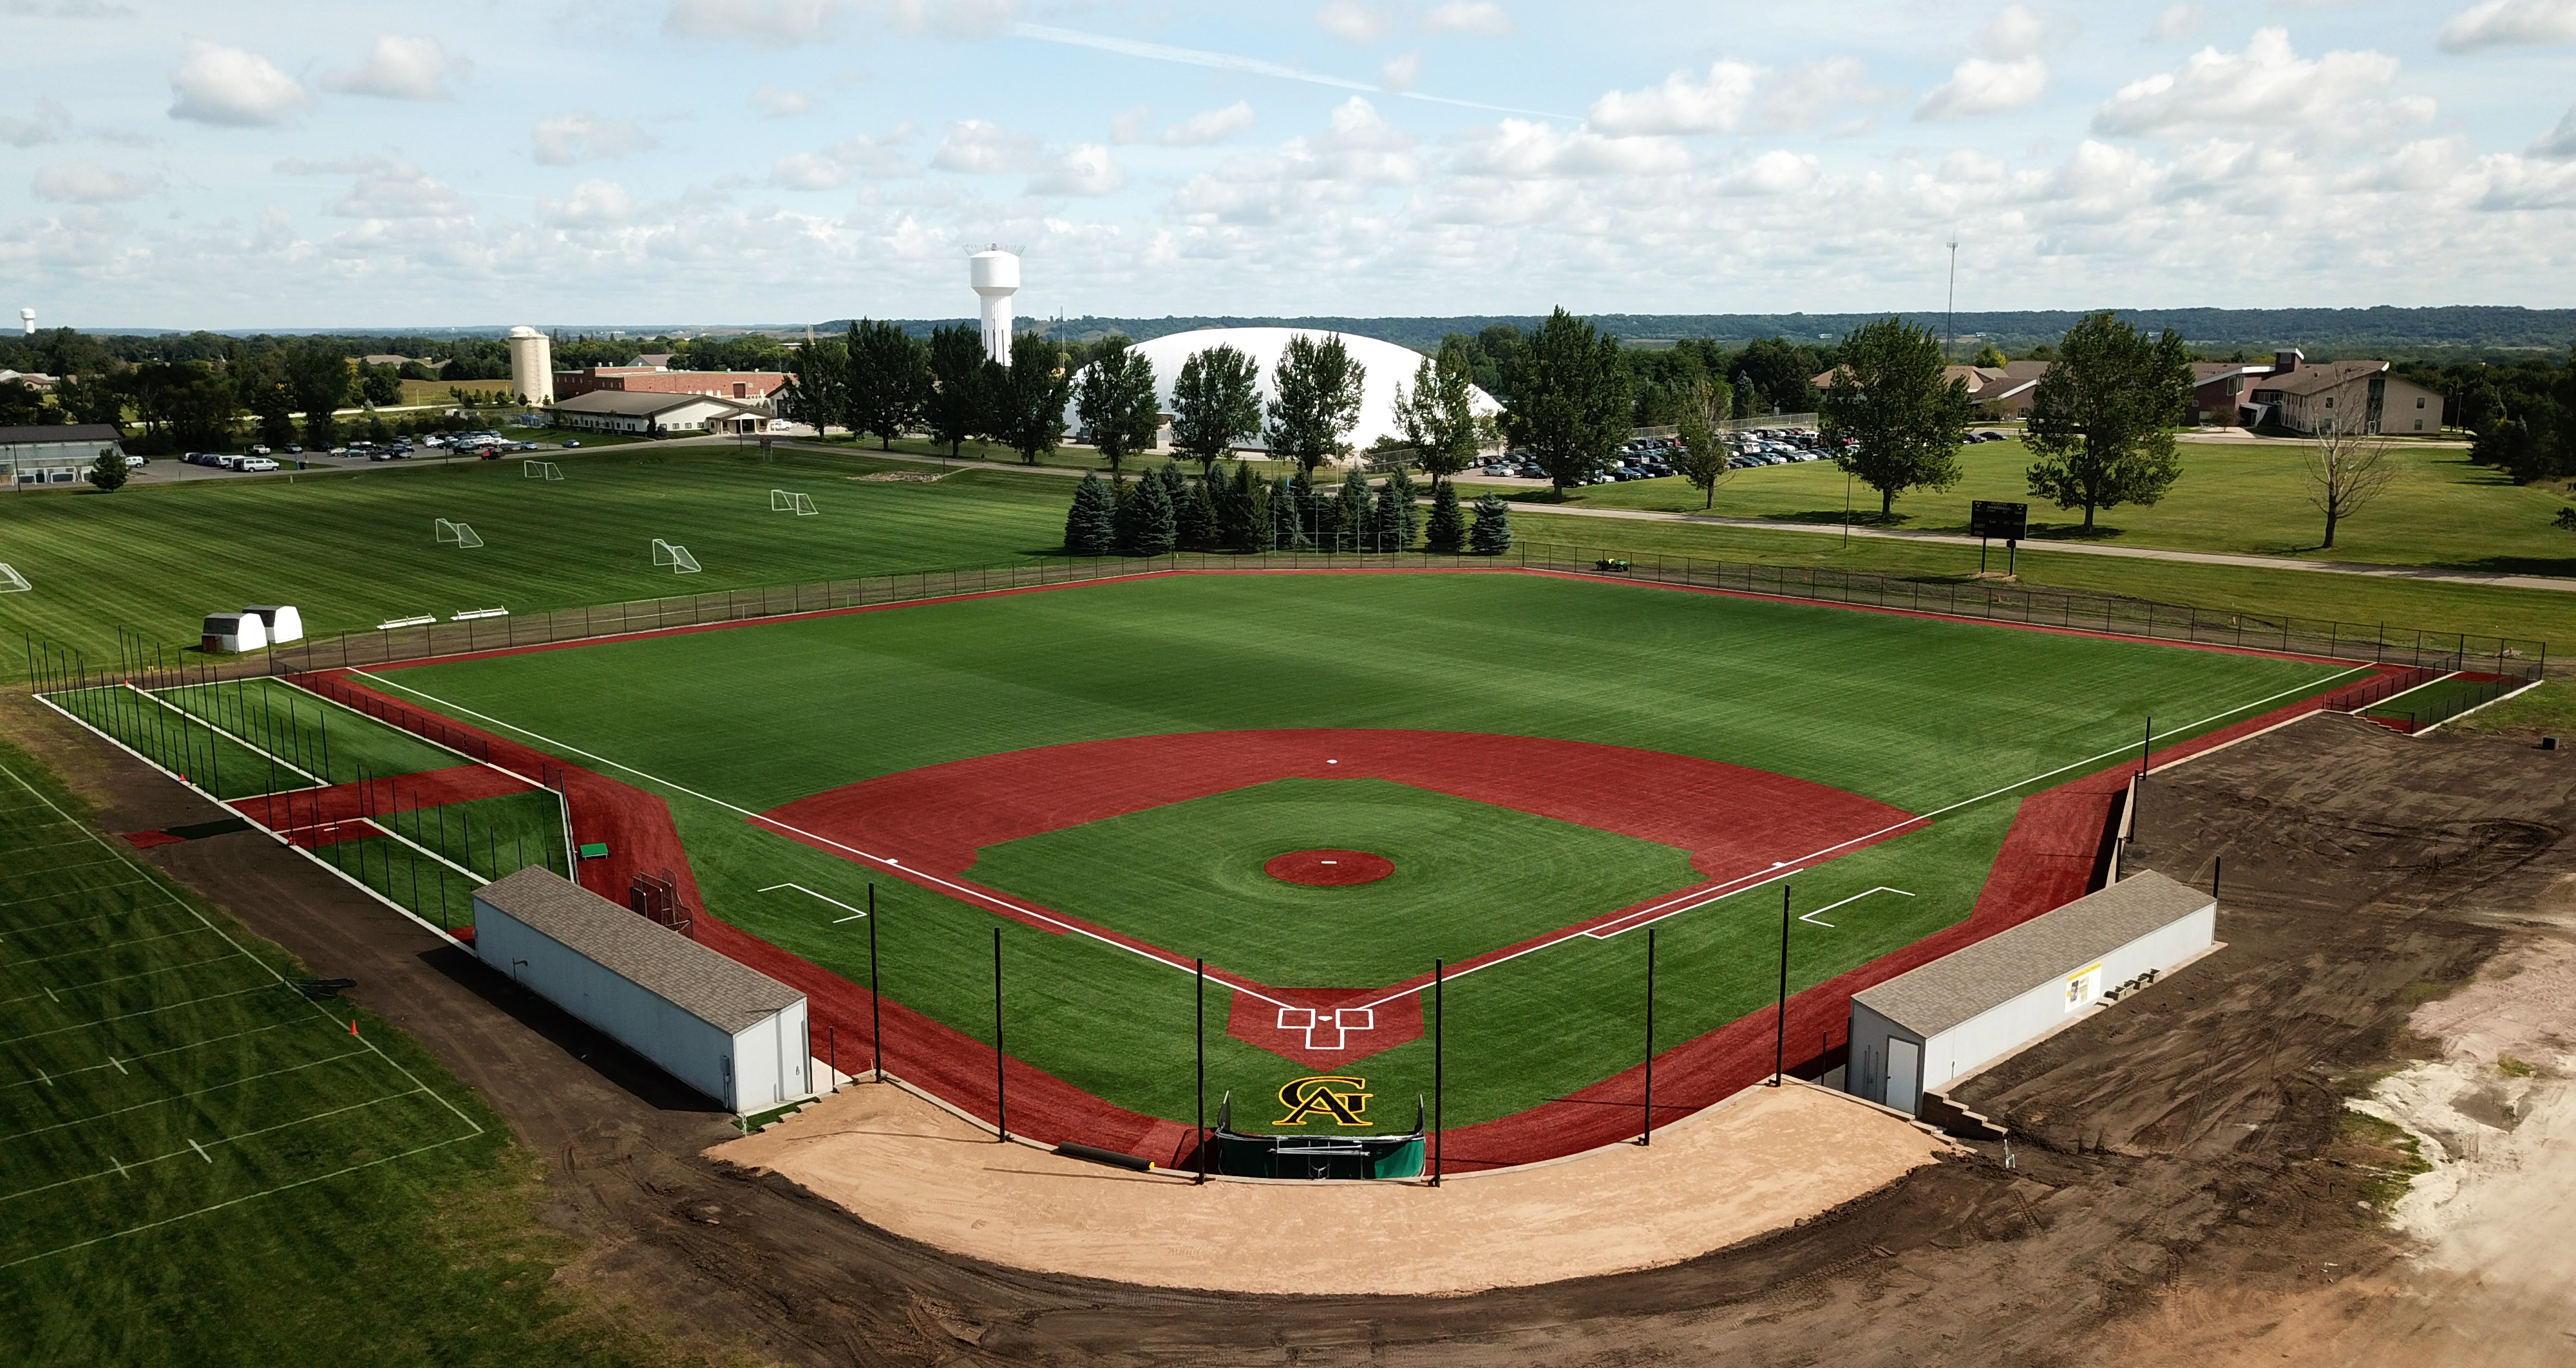 Baseball To Host Instructional Camp Oct. 14 At Newly Renovated Field